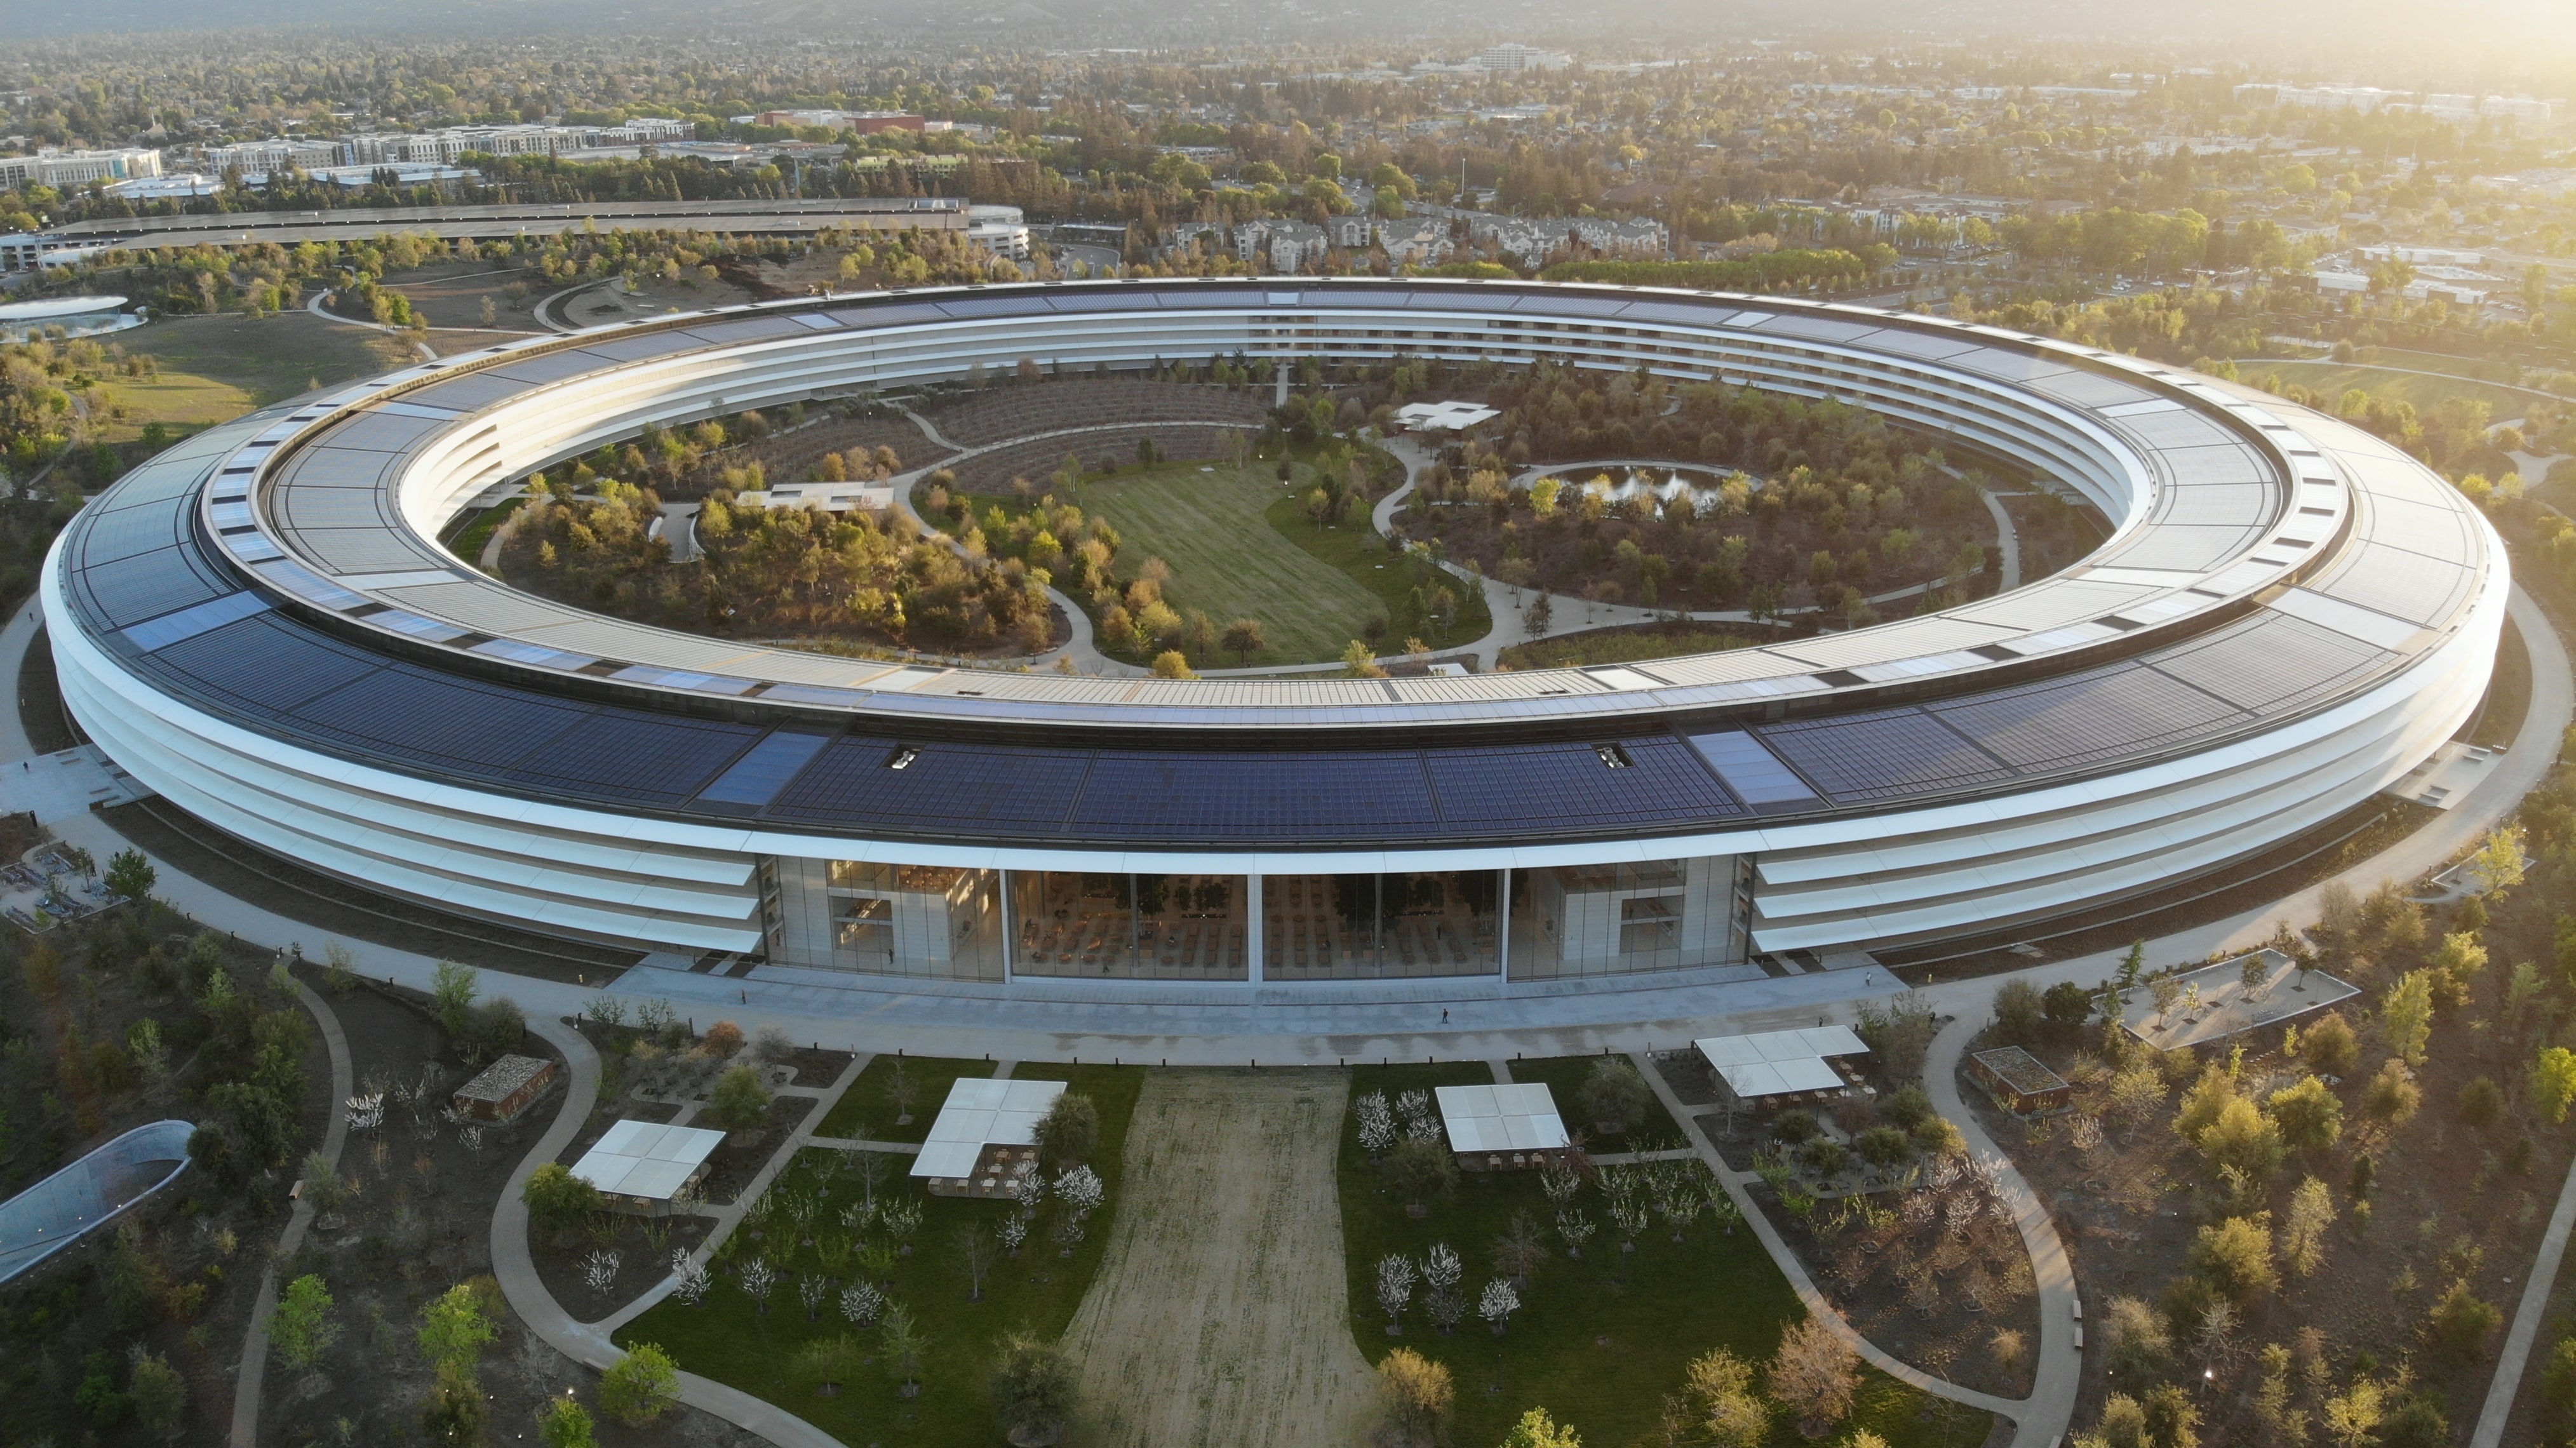 Apple Park building in California, 2020 view from above